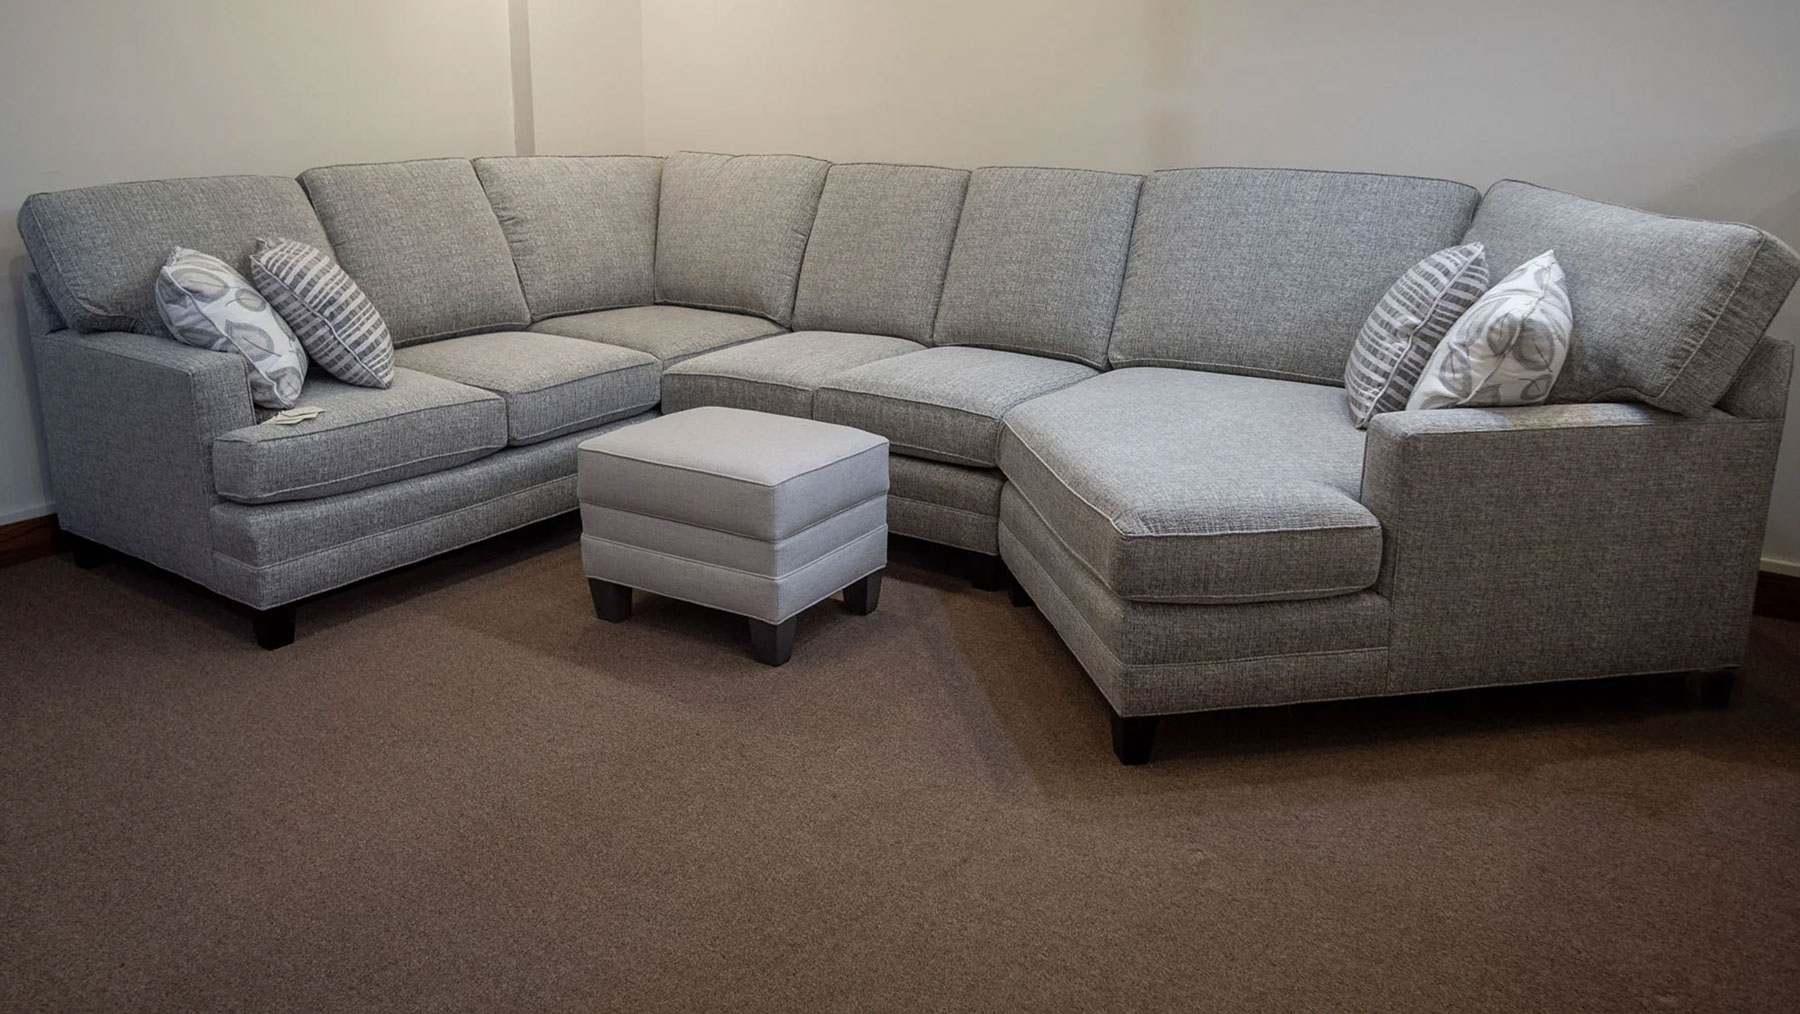 Temple Tailor Made 24 inch Seat Depth Sectional in Kentucky Basalt Fabric